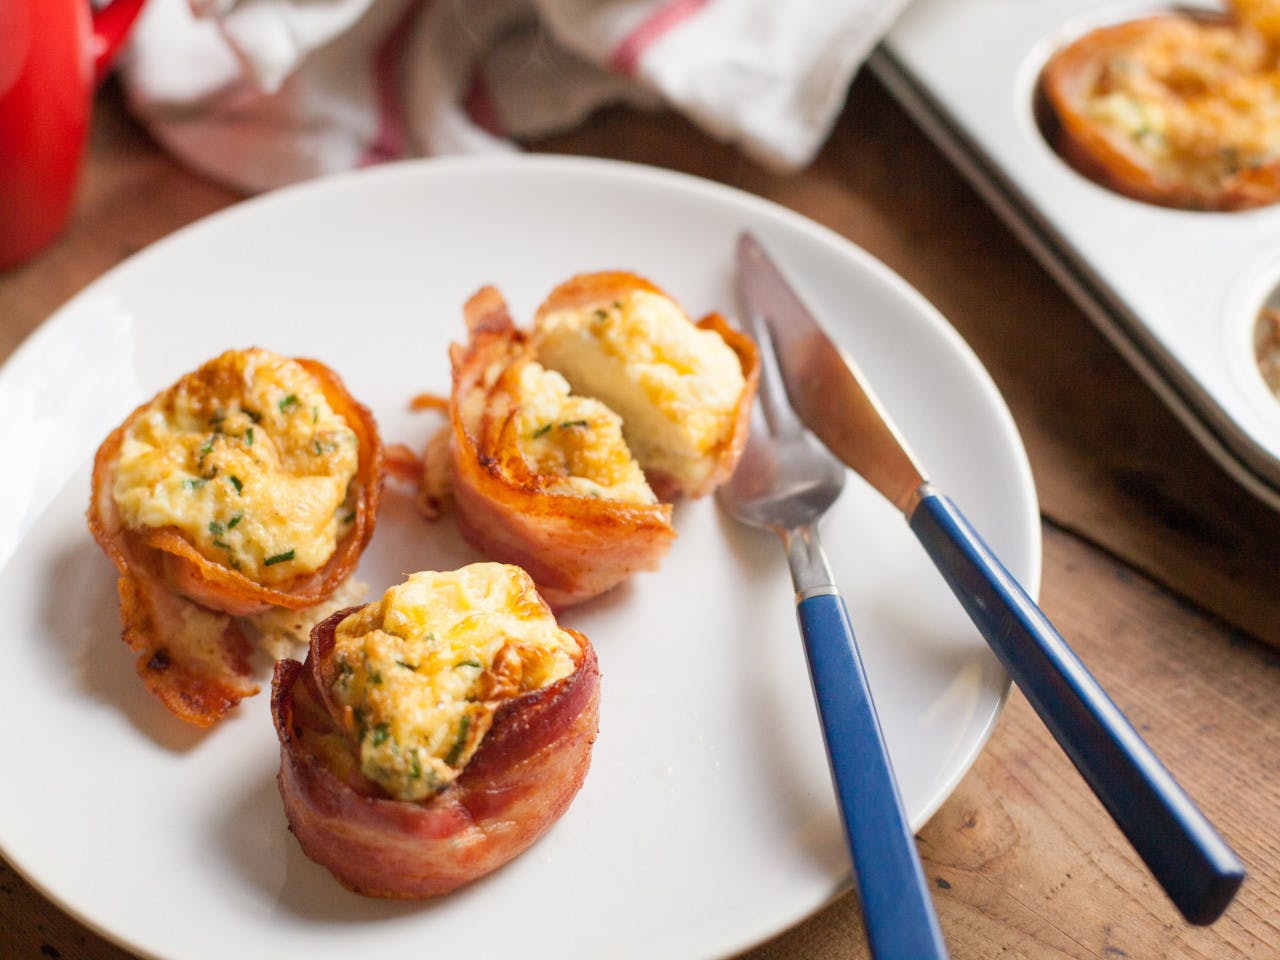 Bacon & egg muffins